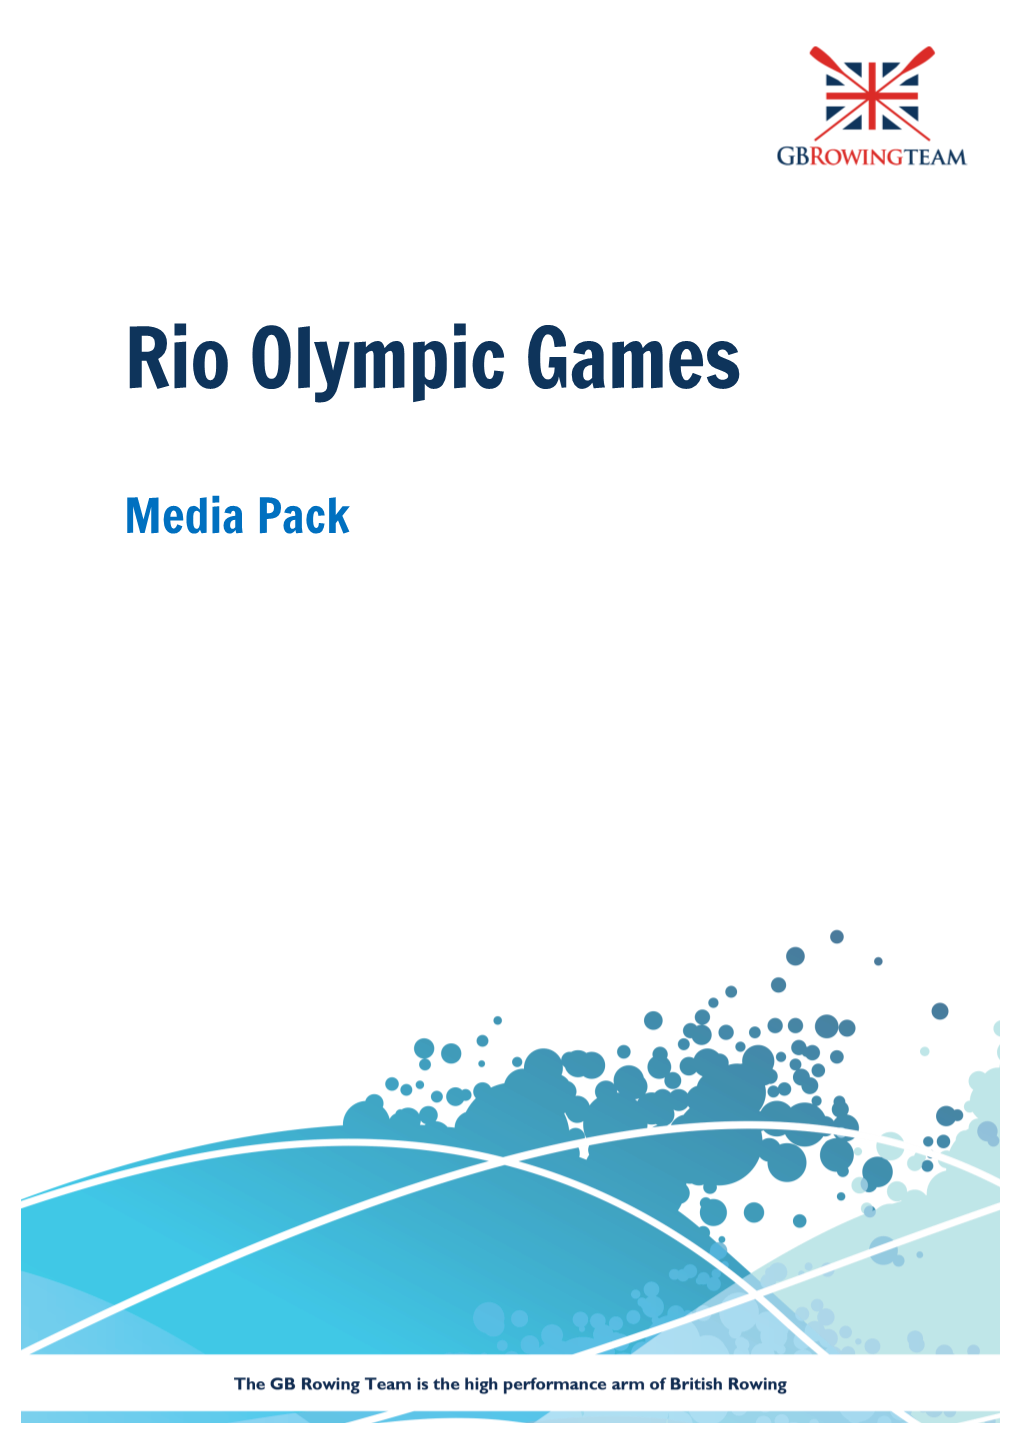 Rio Olympic Games